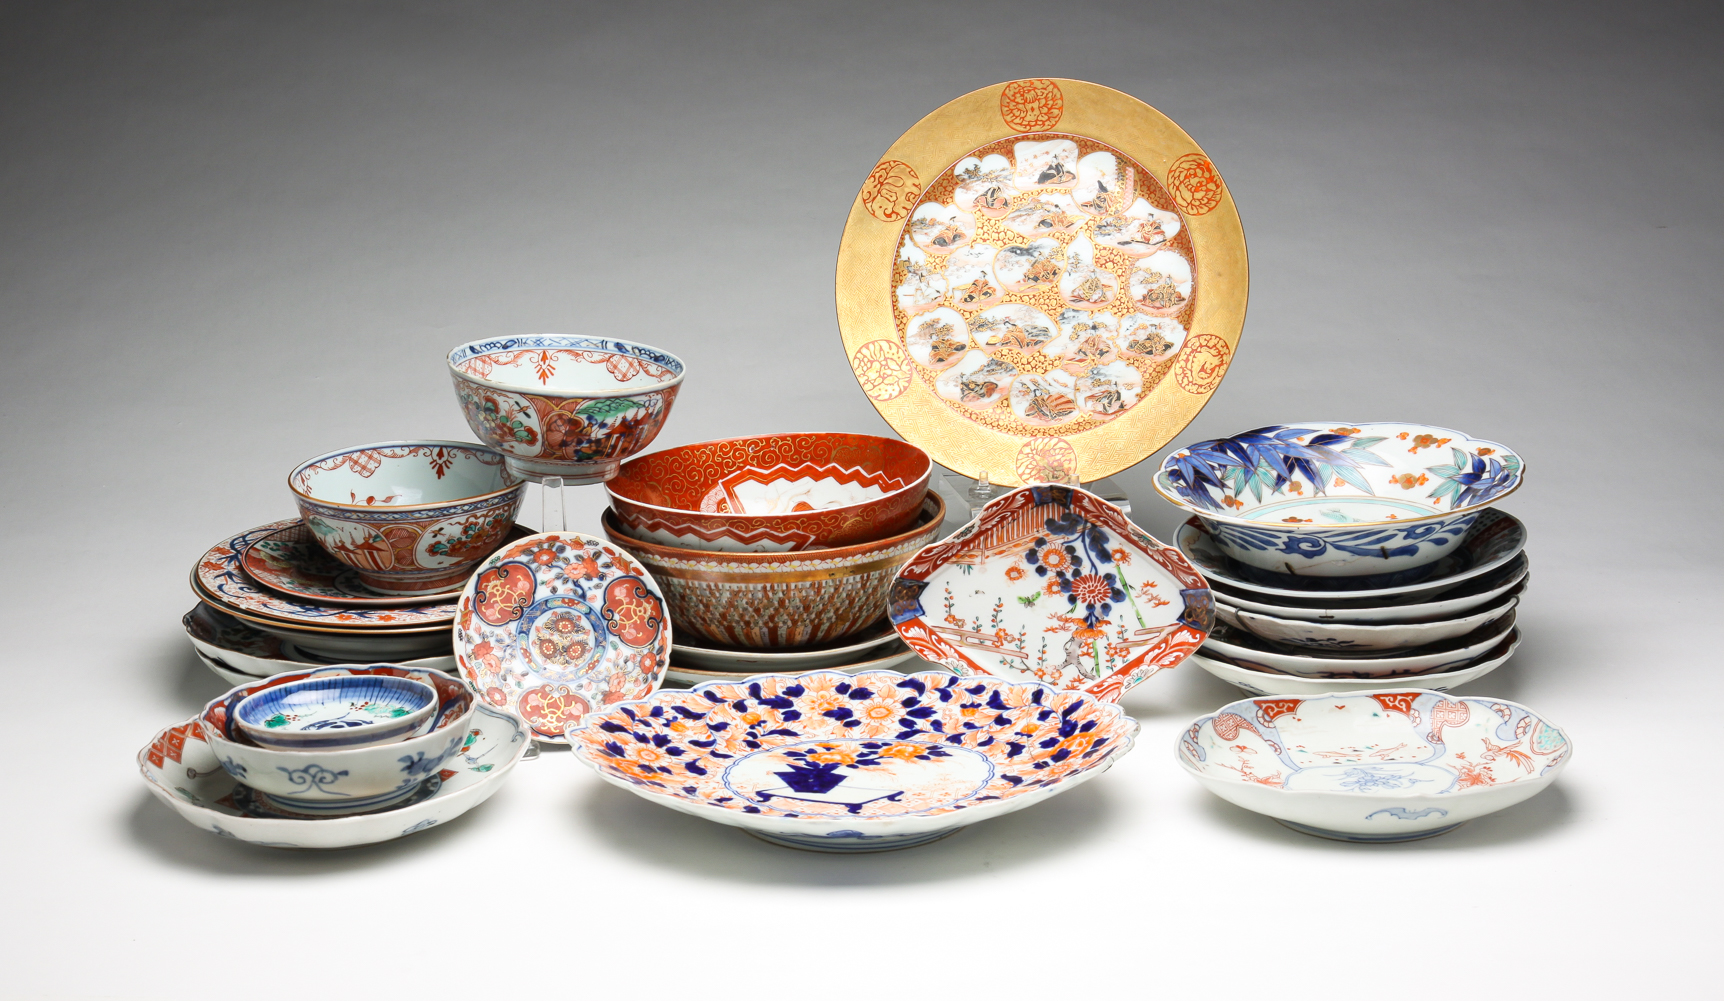 GROUP OF CHINESE AND JAPANESE PORCELAIN  2dfa3a